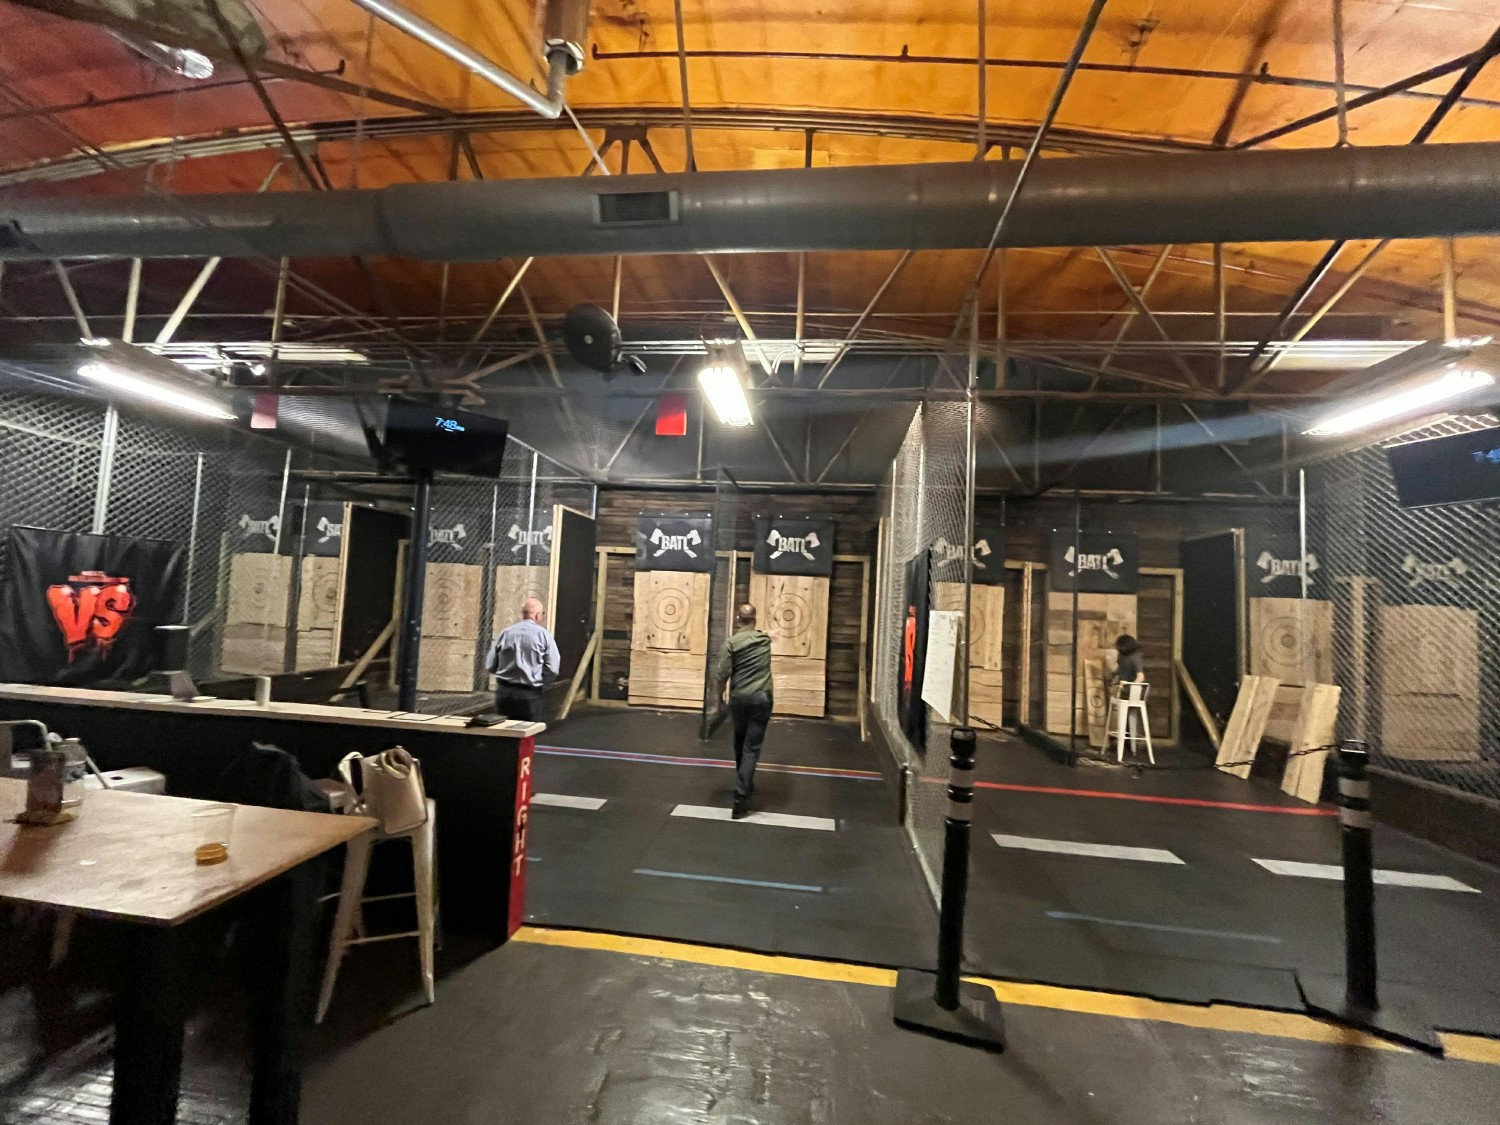 Our team enjoyed some axe throwing after a quarterly meeting.